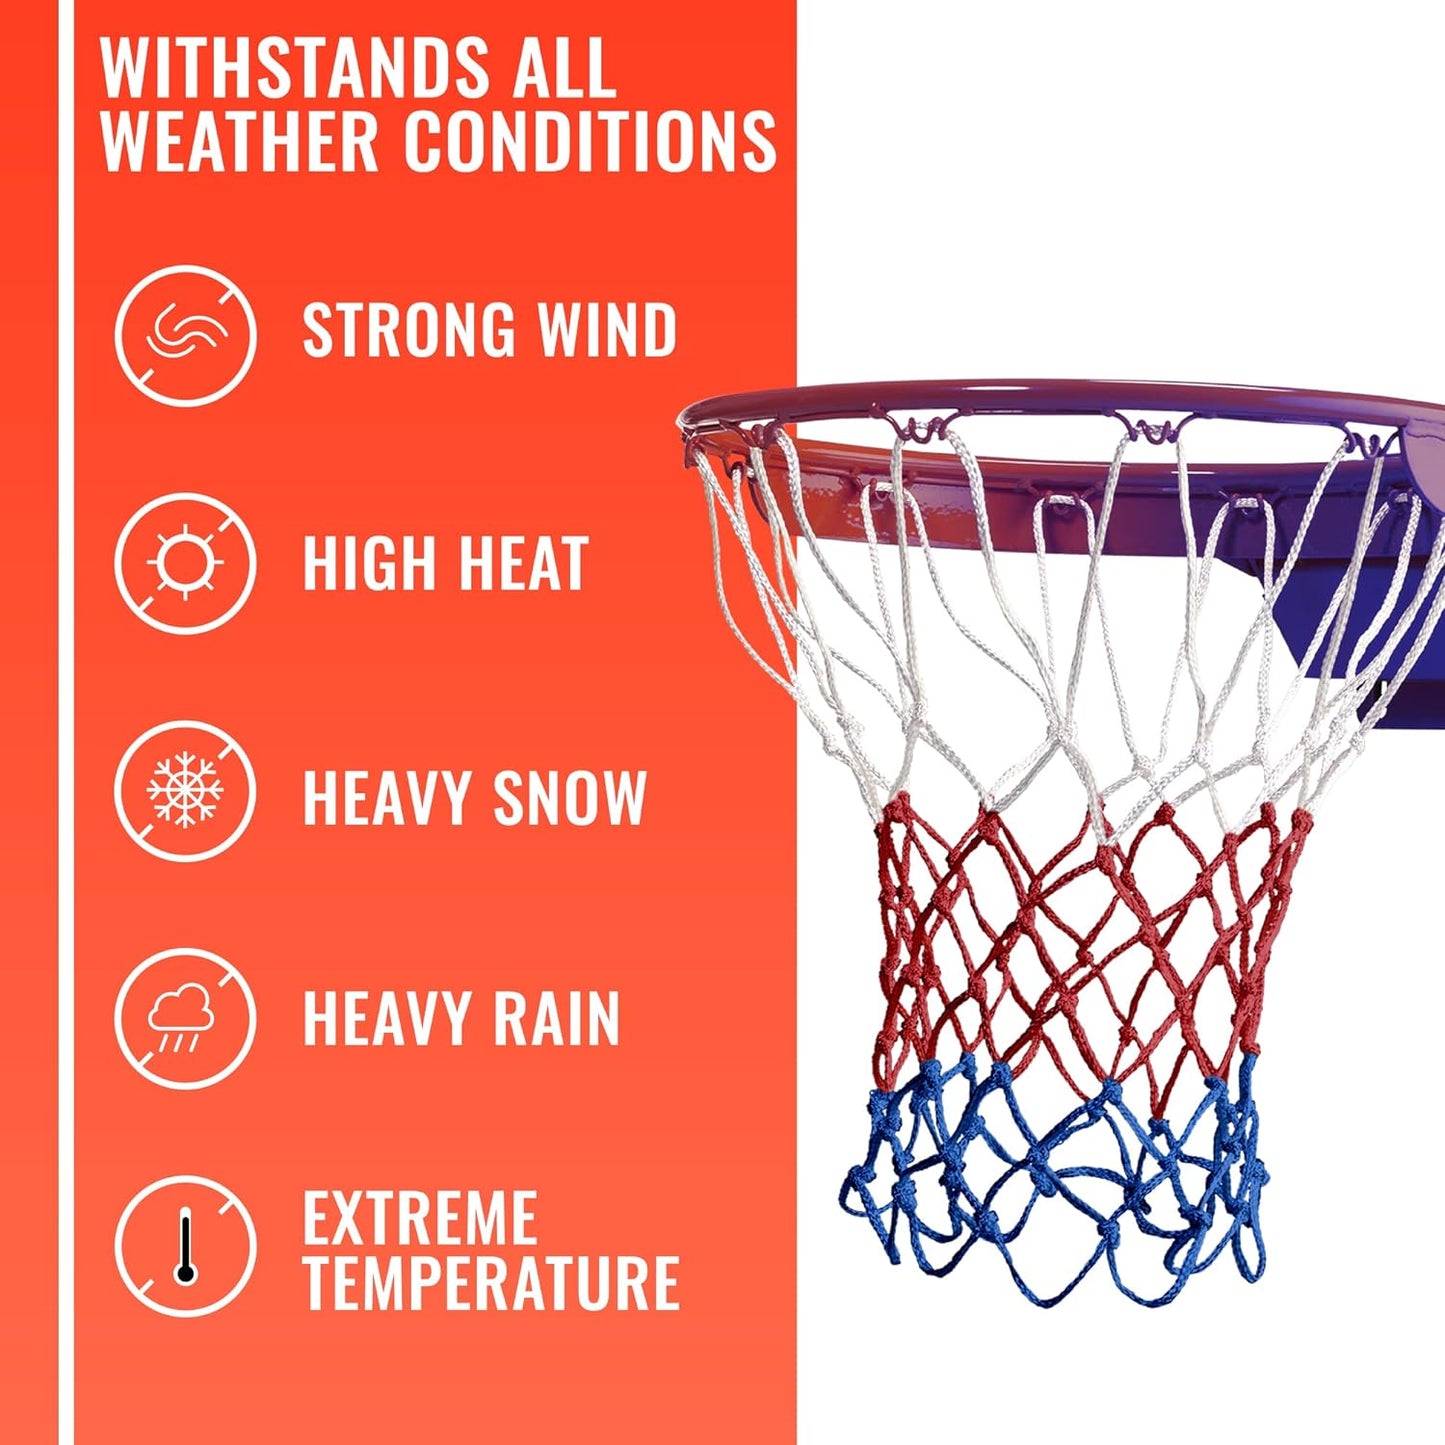 Ultra Sporting Goods Heavy Duty Basketball Net Replacement - All Weather Anti Whip, Fits Standard Indoor or Outdoor Rims - 12 Loops